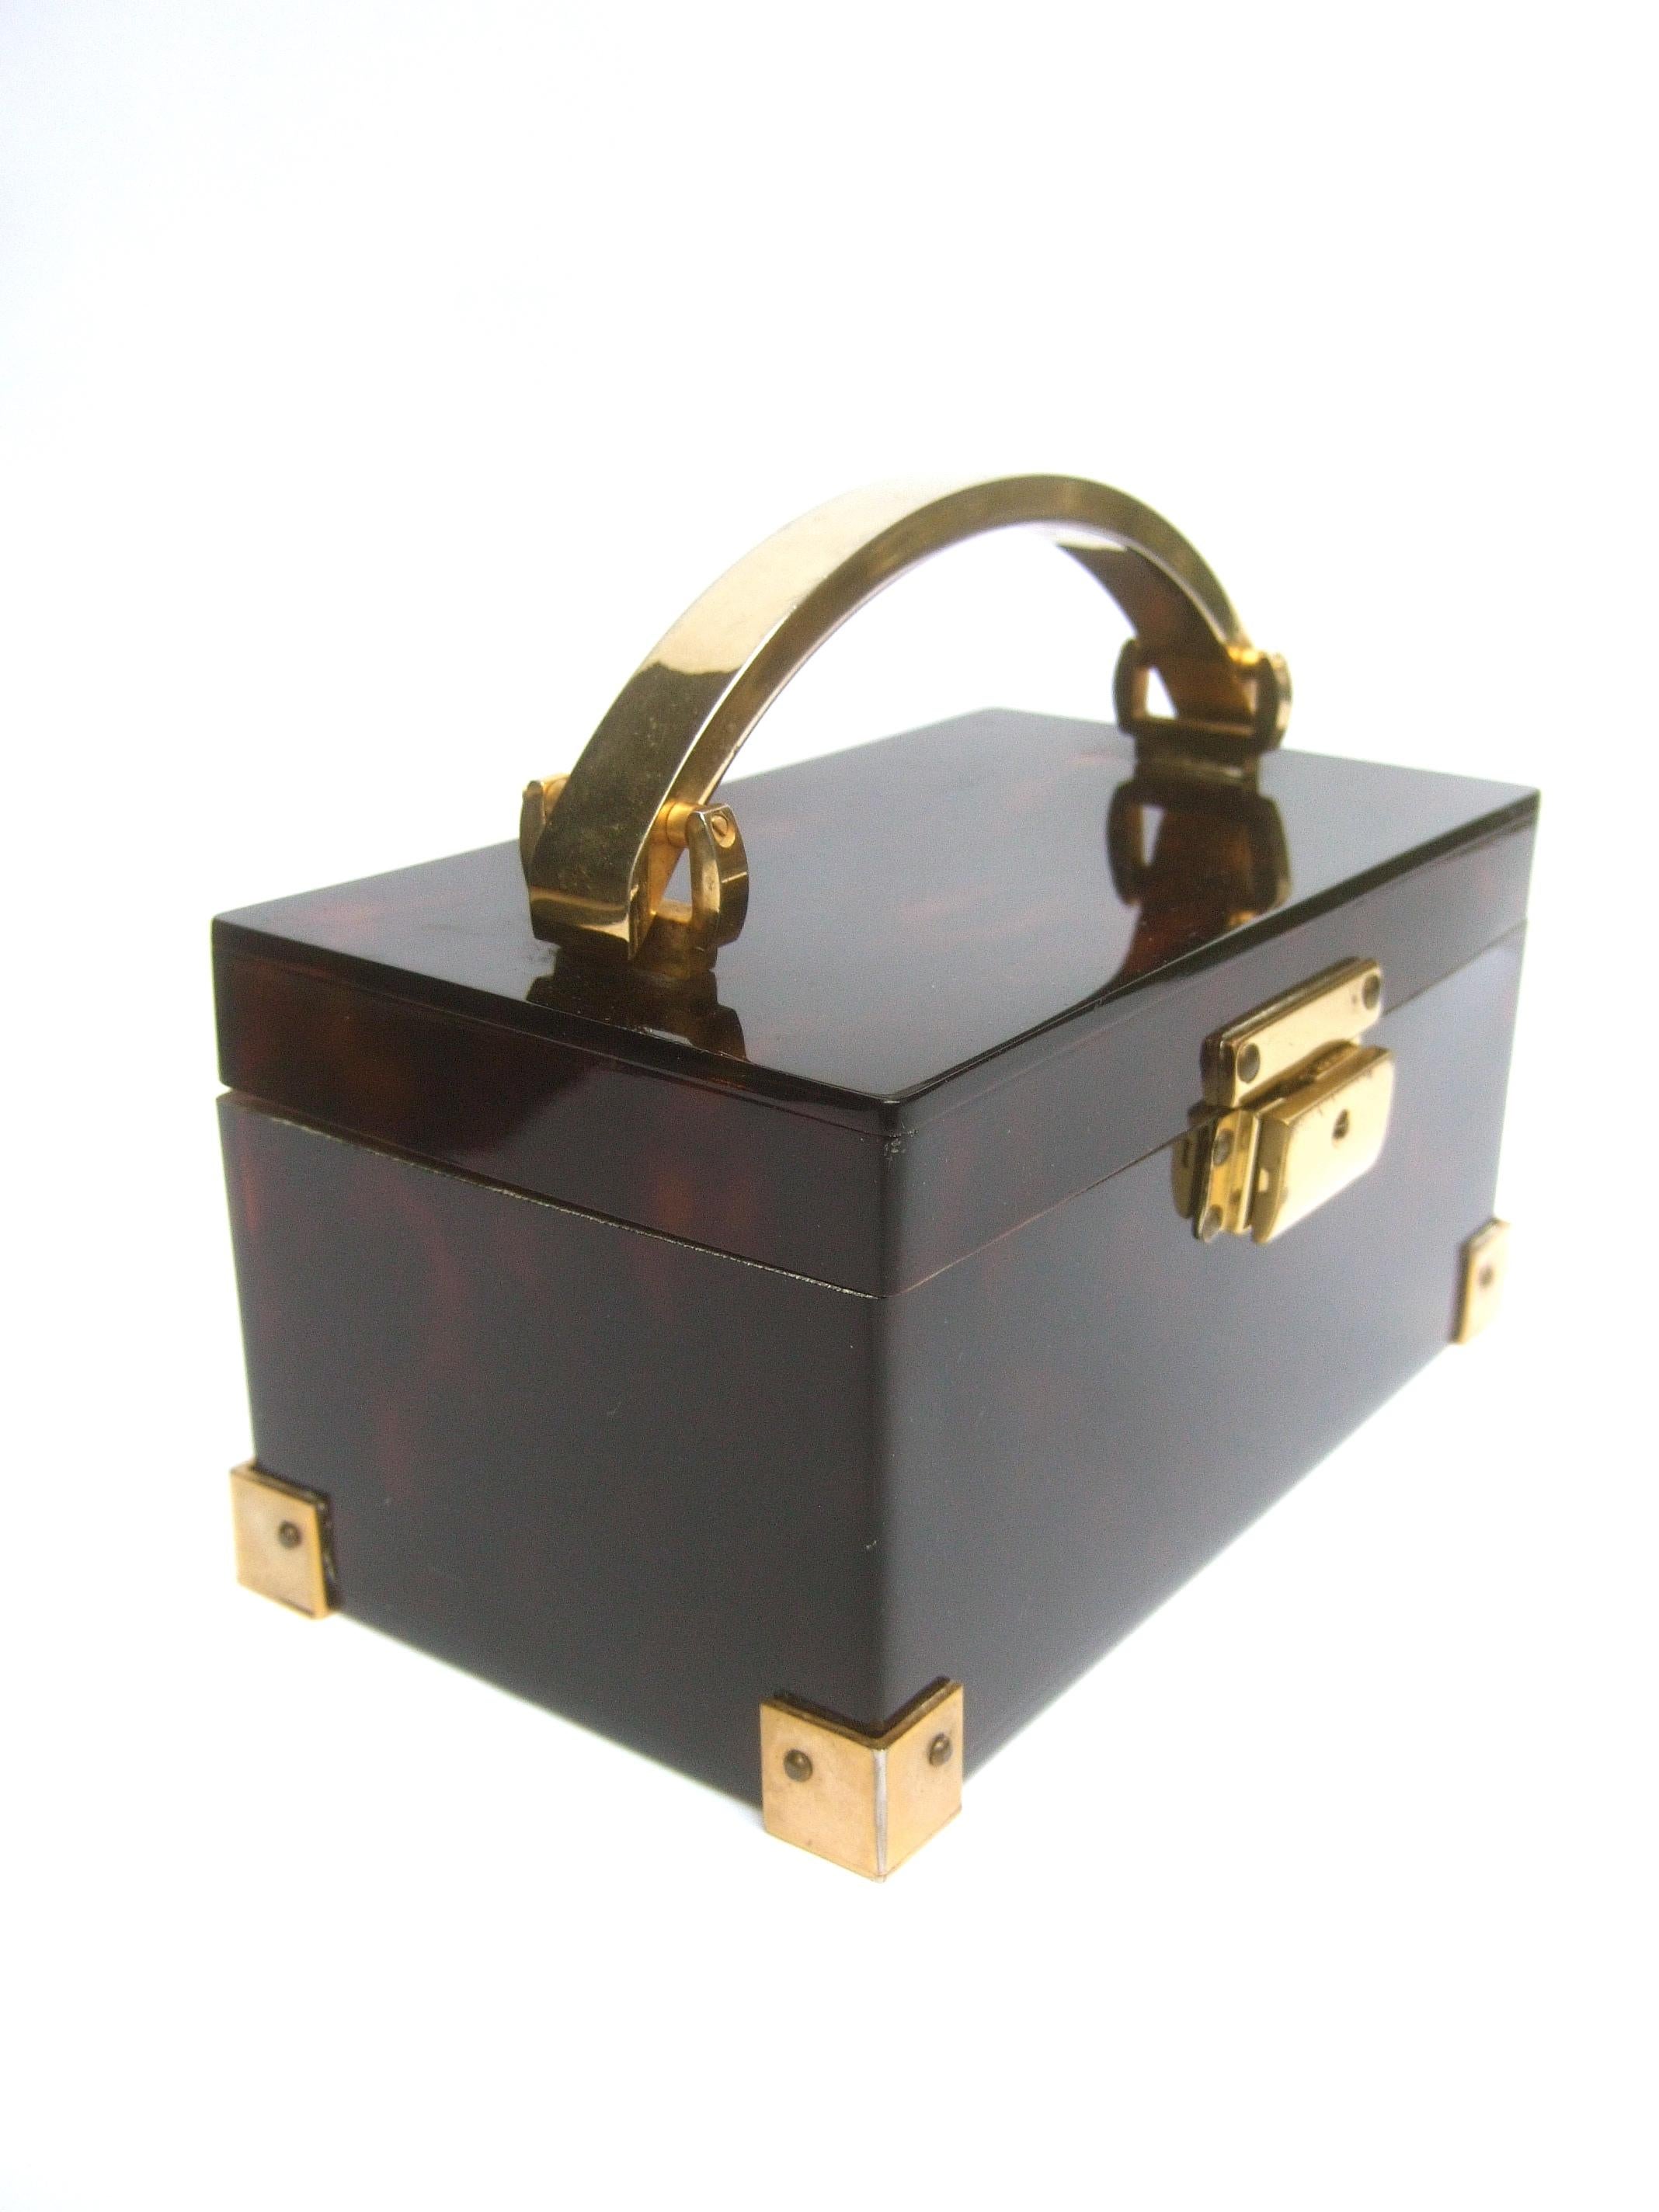 Saks Fifth Avenue Sleek tortoise-shell lucite box purse c 1970s
The stylish vintage box purse is constructed with dark brown lucite opaque panels; 
against light shows the subtle tortoise-shell design

Adorned with a sleek gilt metal stationary